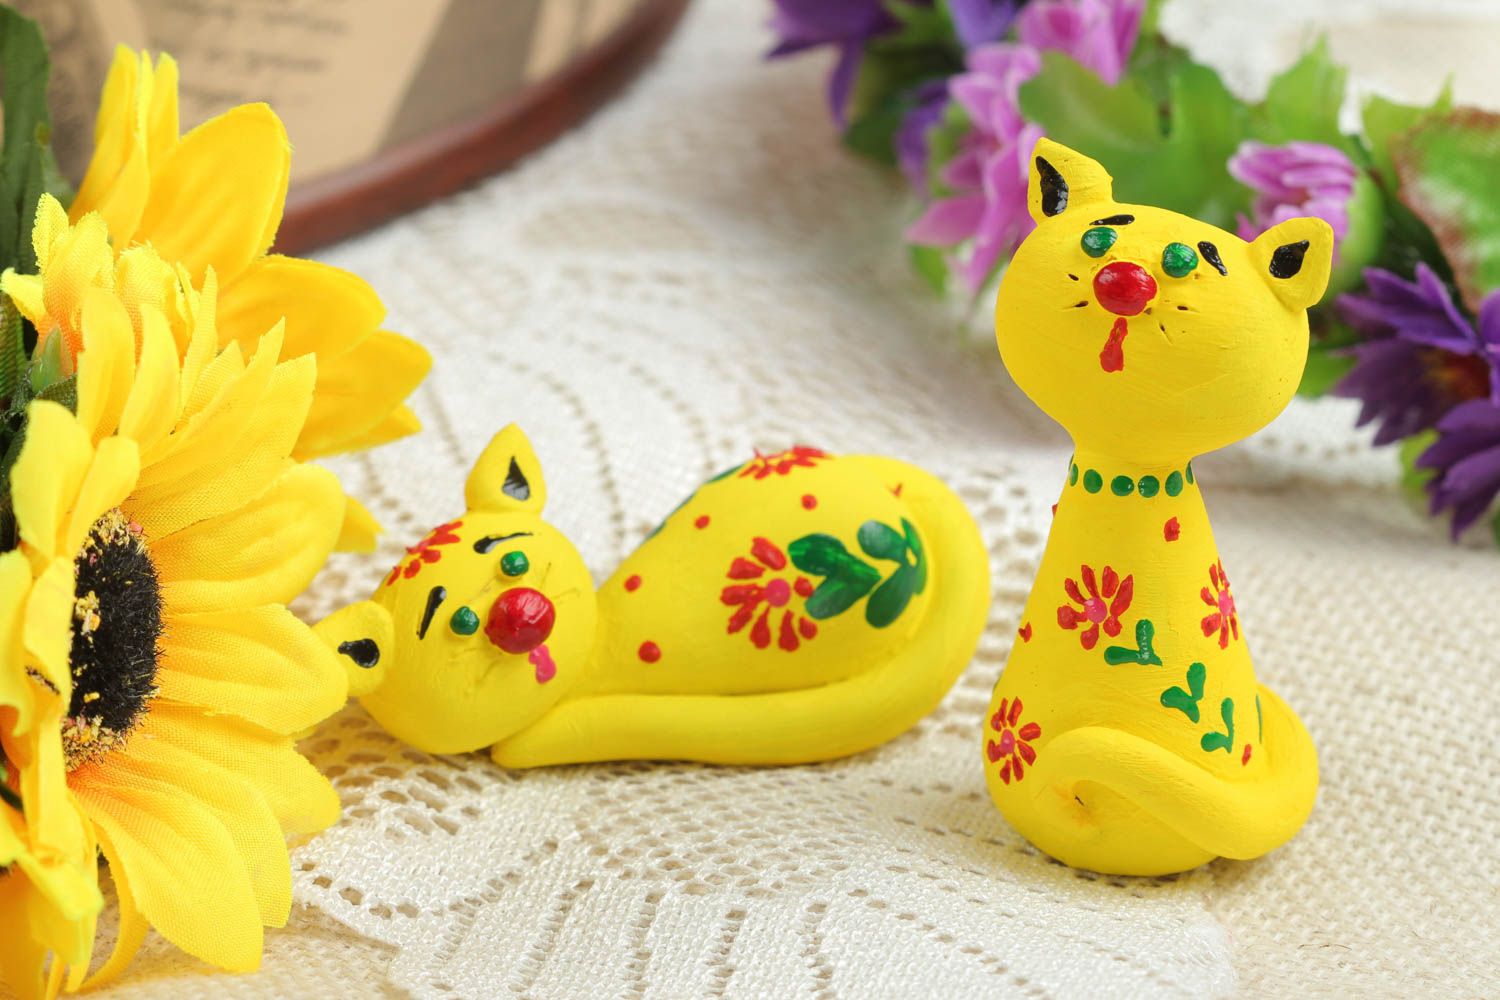 Handmade clay figurines 2 pieces home decoration small gifts decorative use only photo 1